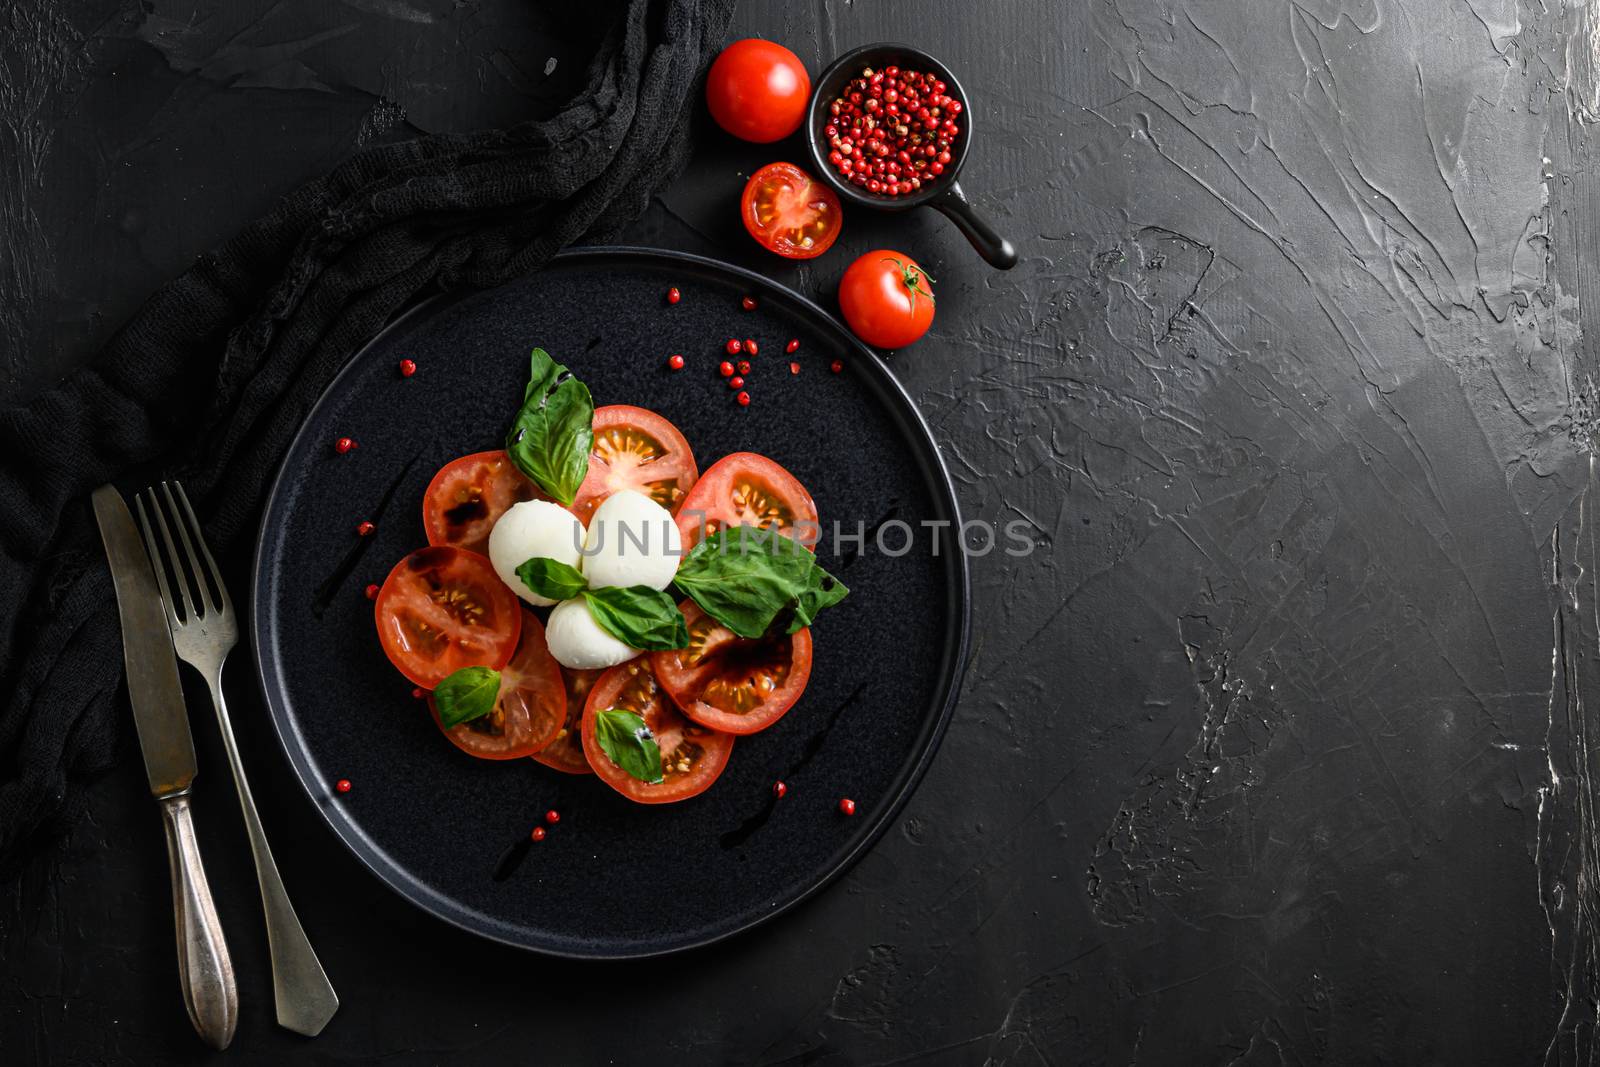 Caprese salad Italian cuisine concept Tomato and mozzarella slices with basil leaves on black ceramic platwantipasta black textured background close up with fork and knife space for text by Ilianesolenyi